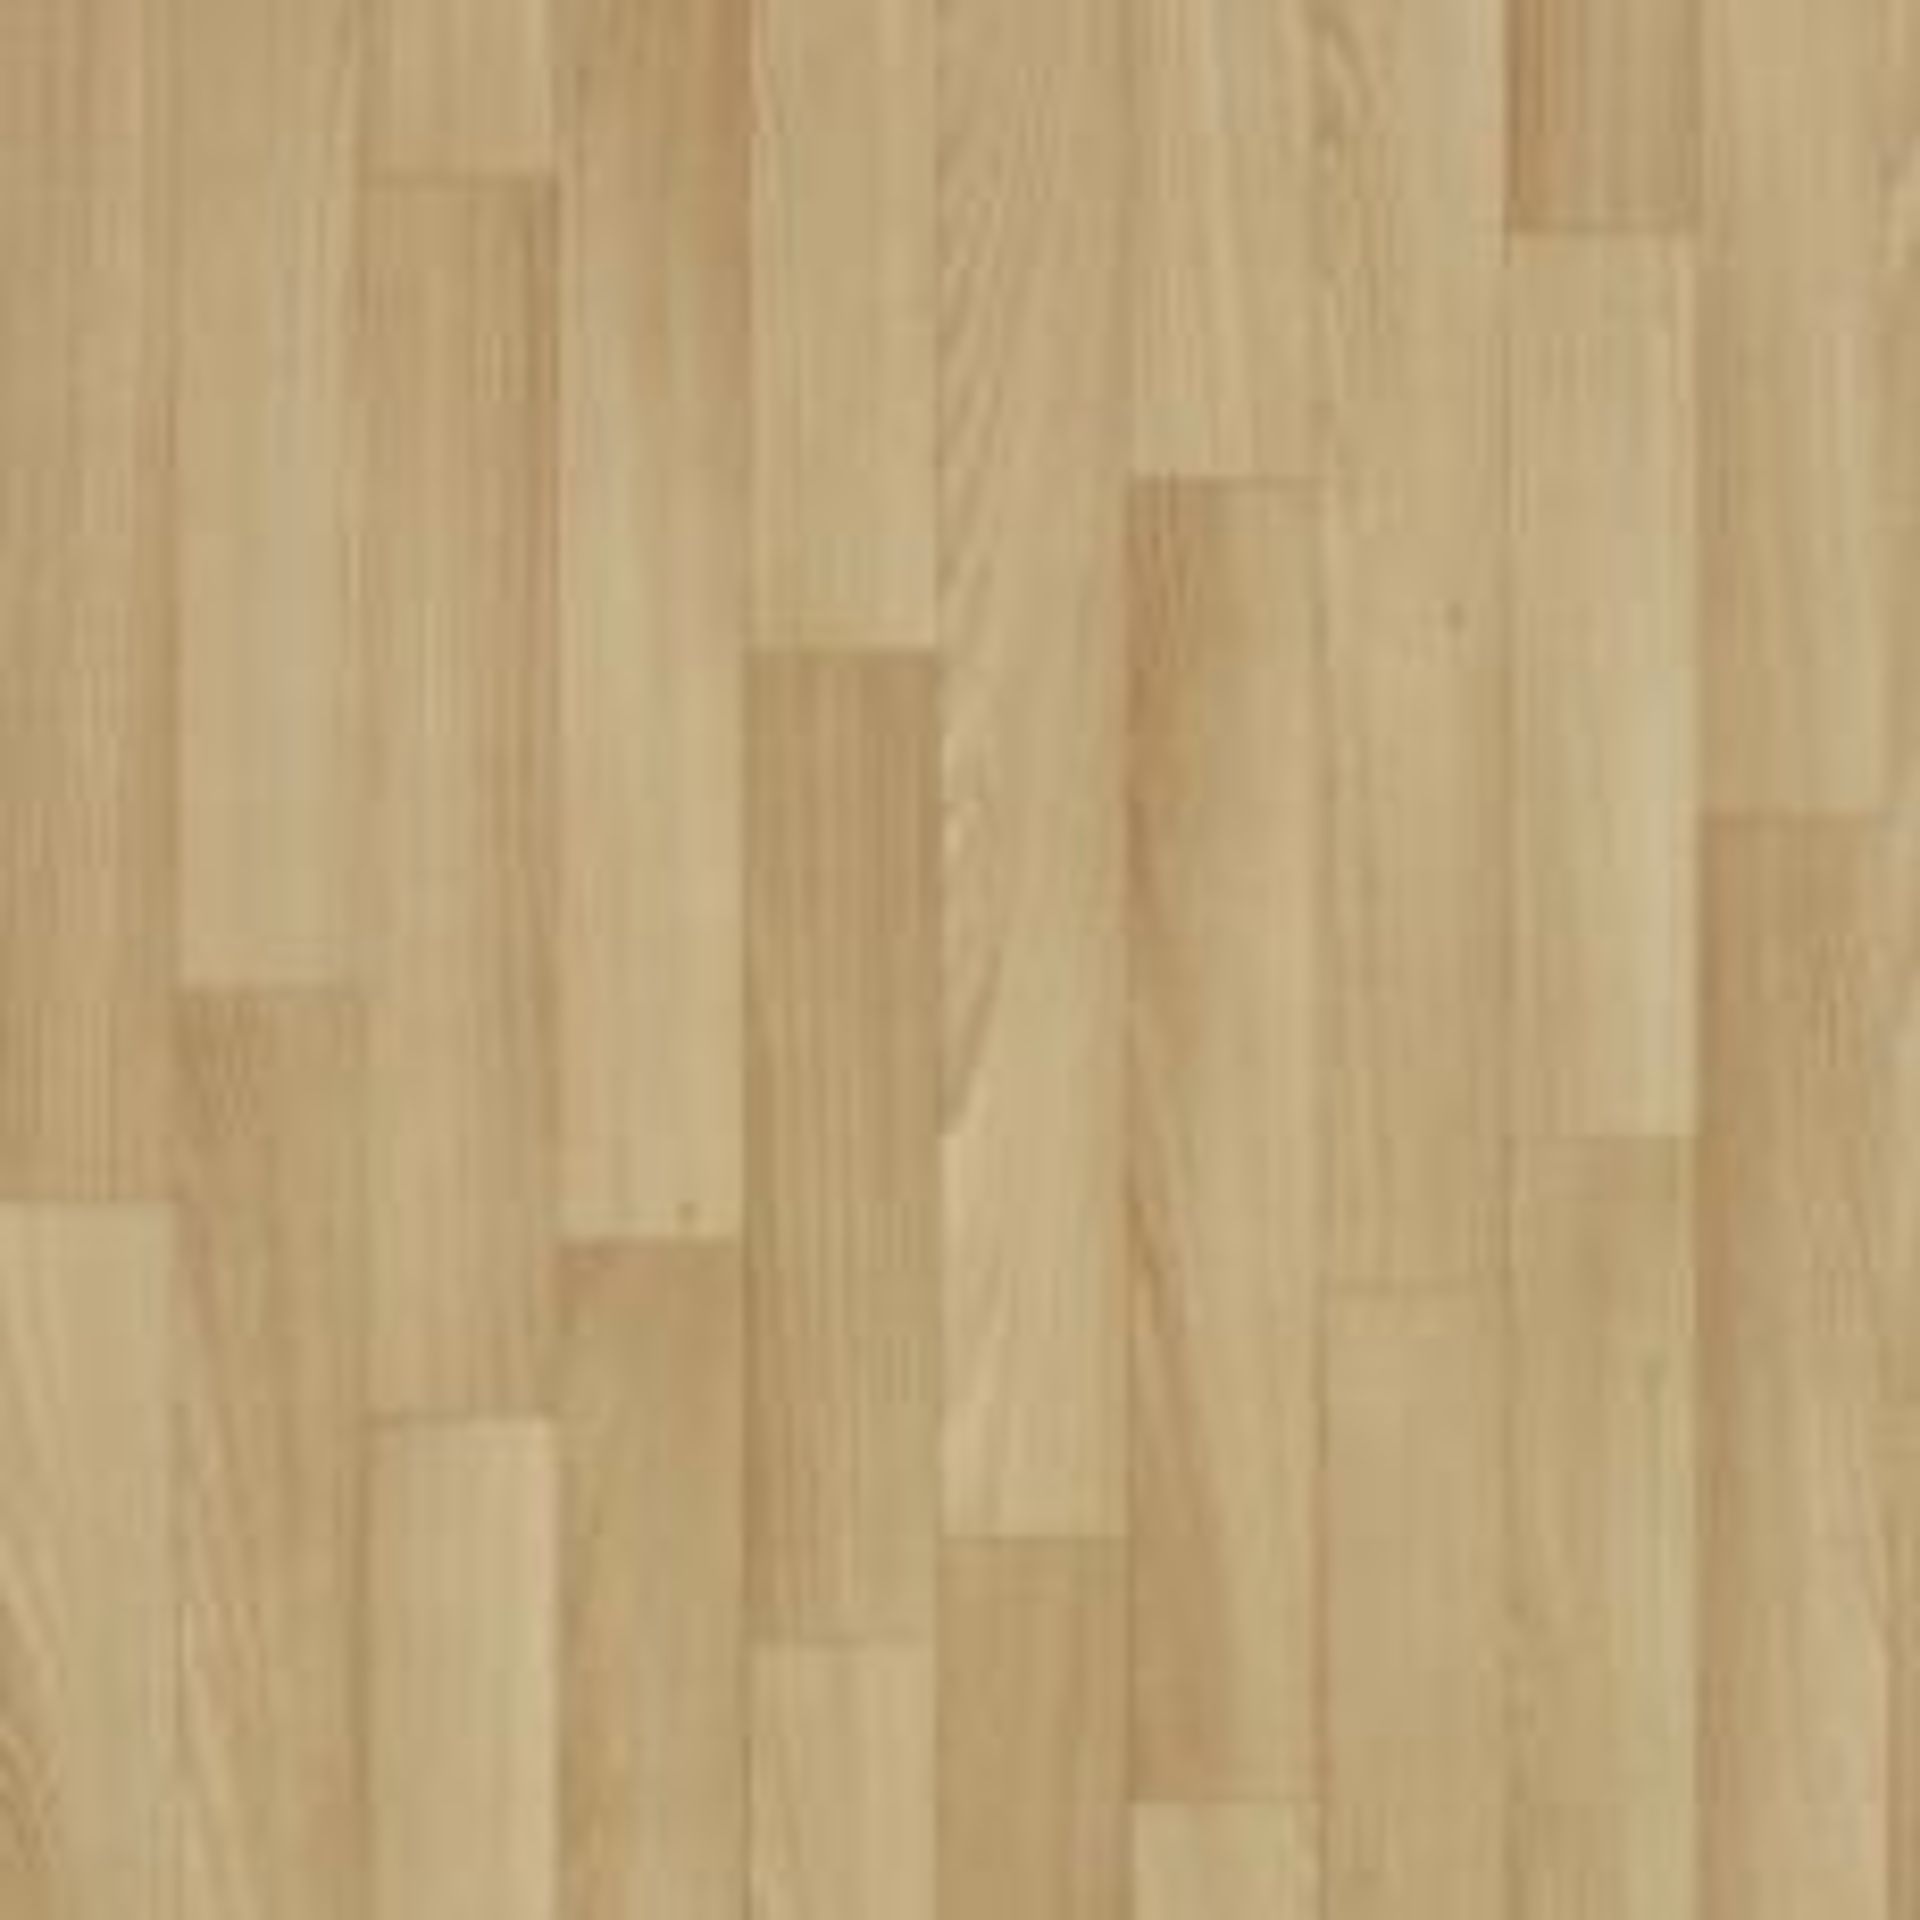 Tarkett Wood - Beech Light The Safetred Design family allows specifiers and end users to select a